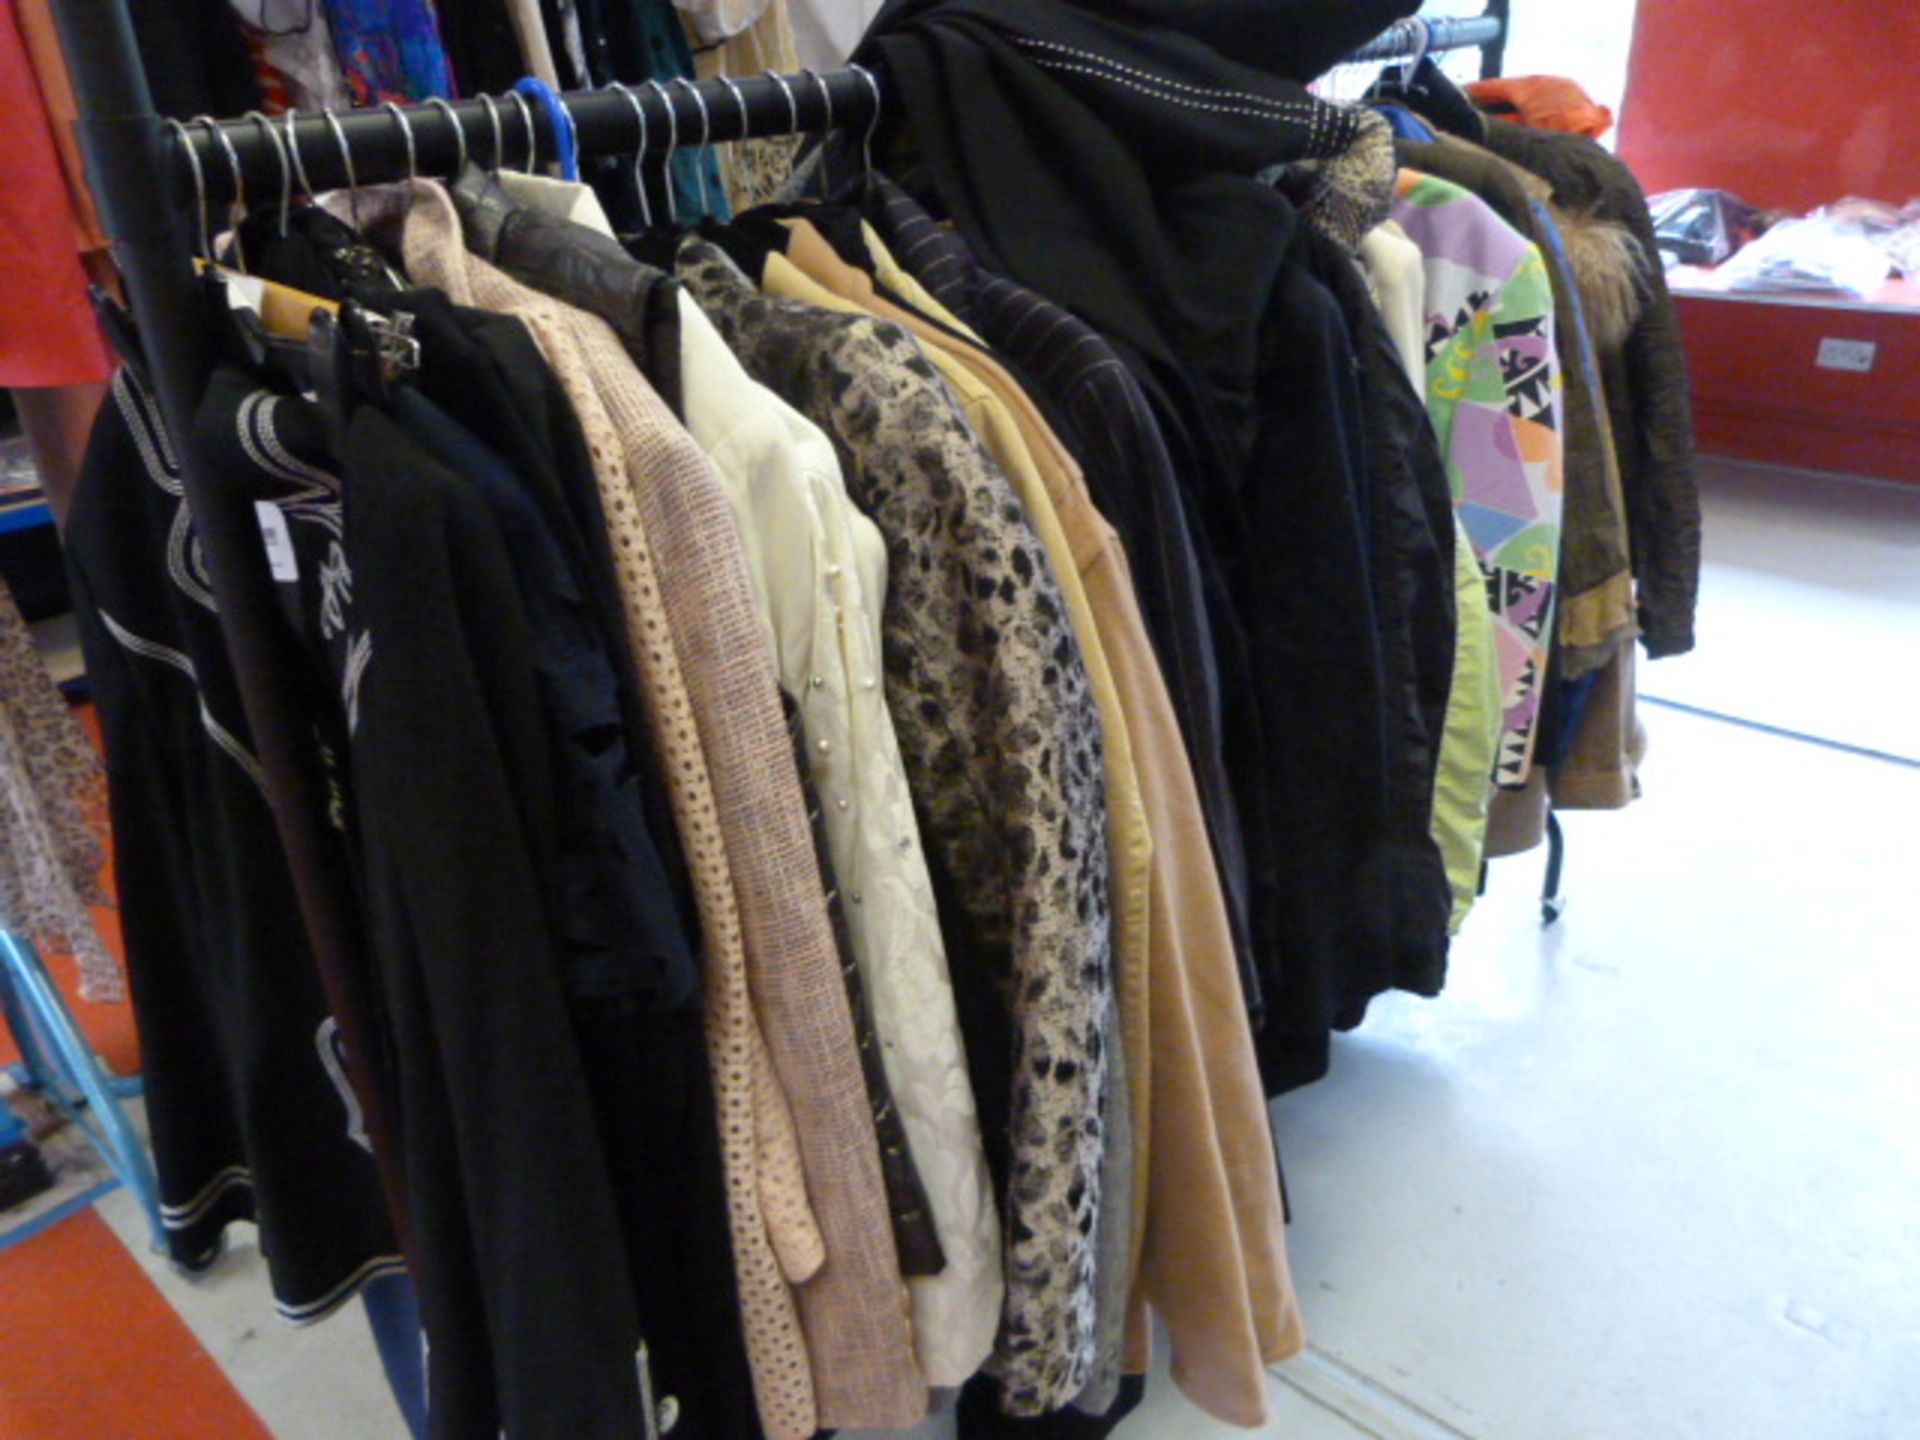 Rail of Assorted Jackets and Tops